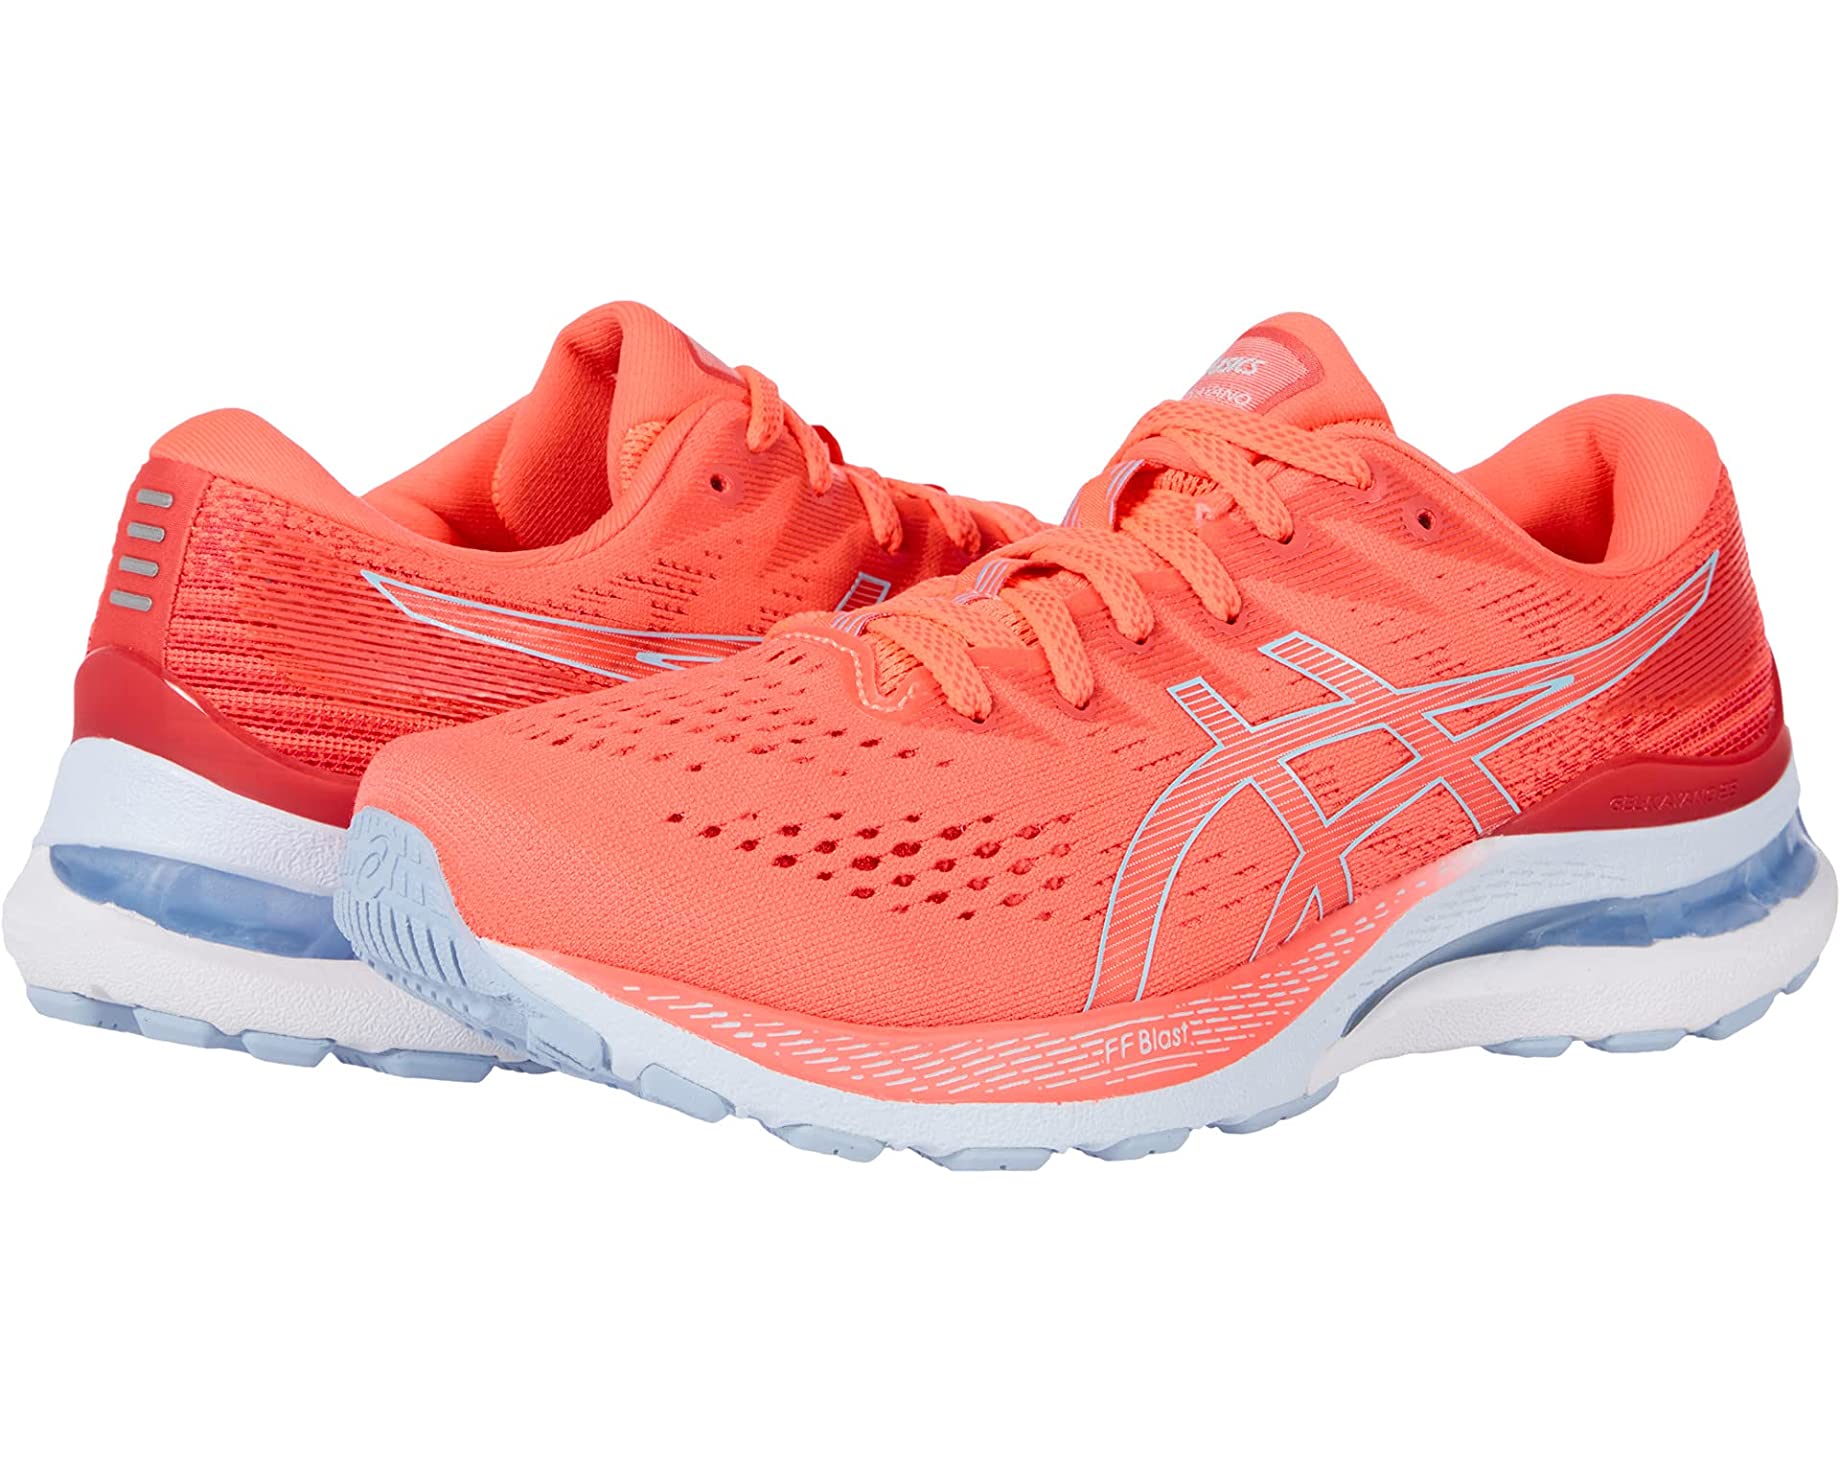 A pair of coral running shoes from Asics.